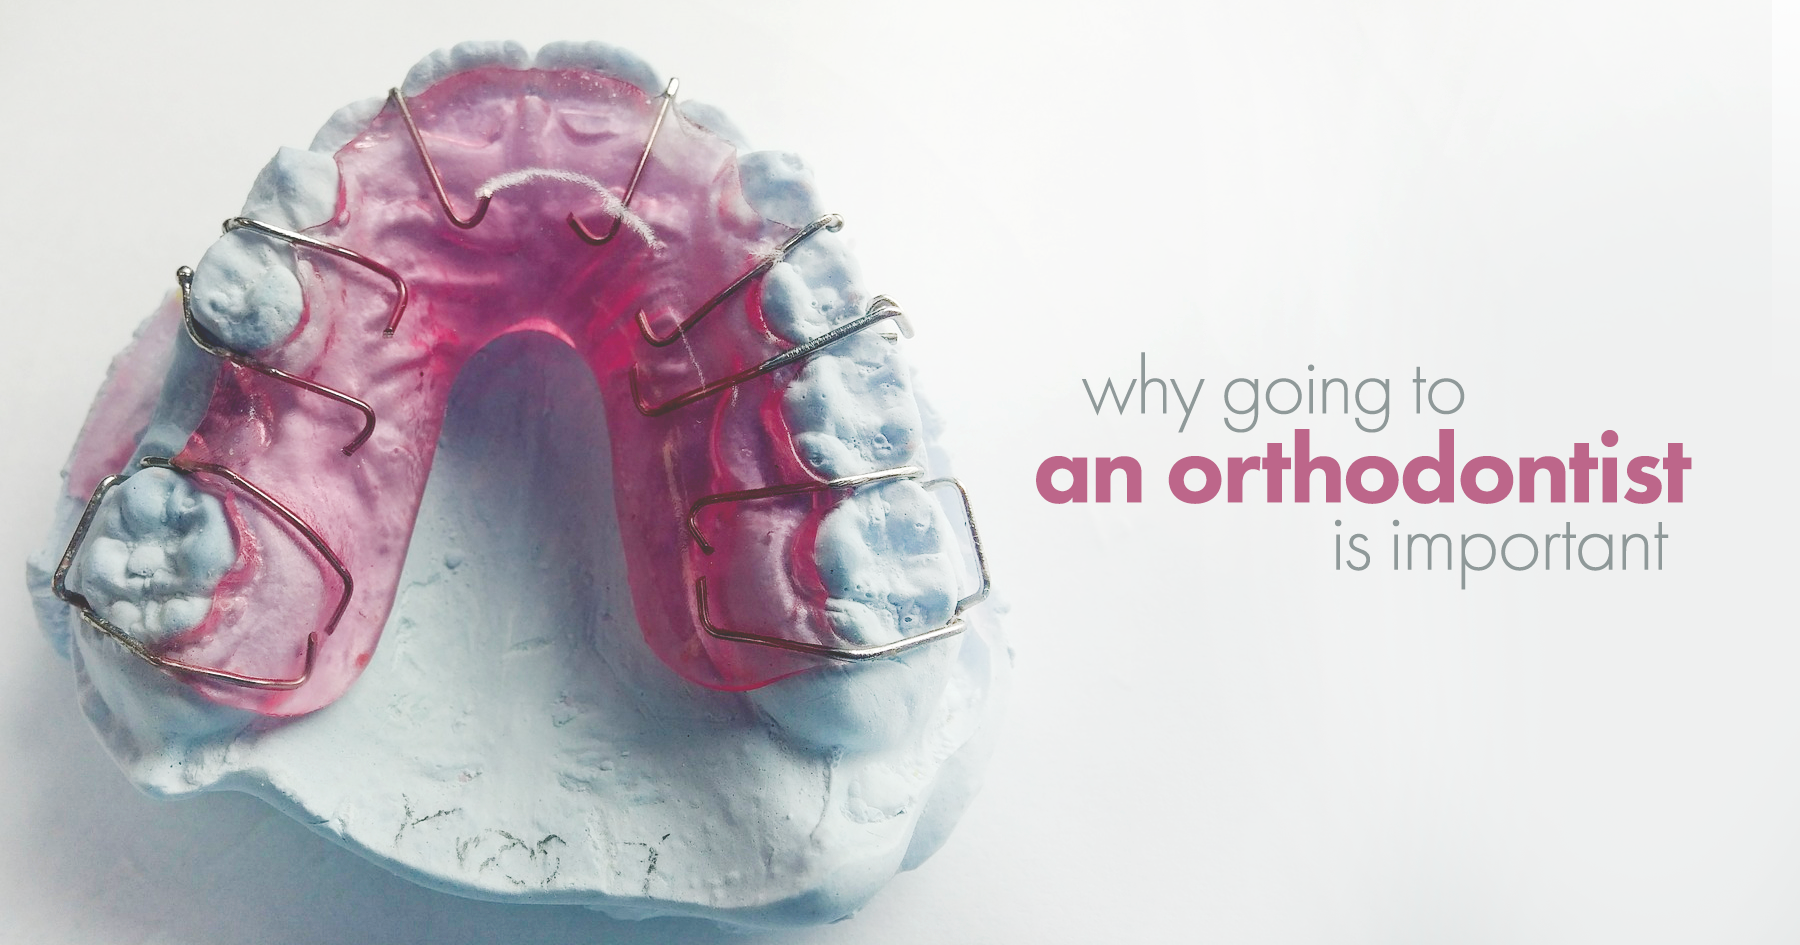 How to Ruin Your Teeth With DIY Orthodontics